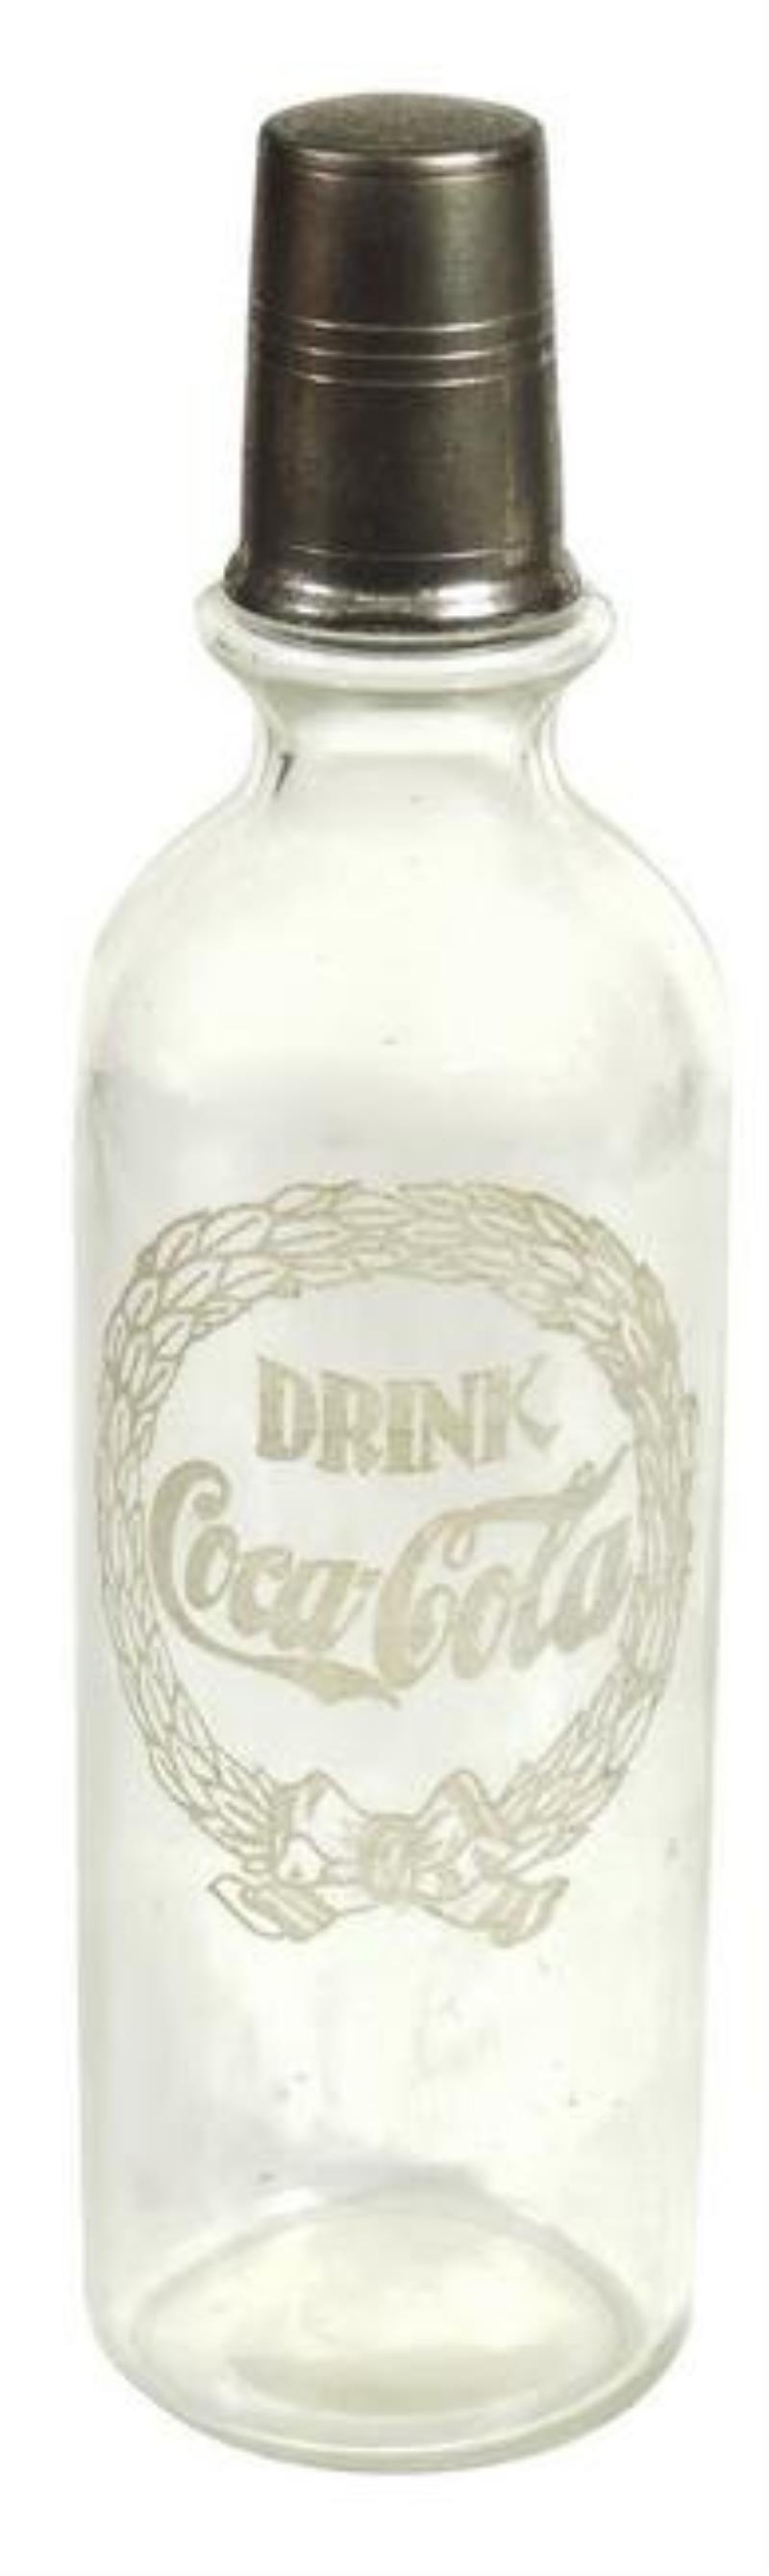 Coca-Cola Syrup Bottle, glass w/enameled "Drink